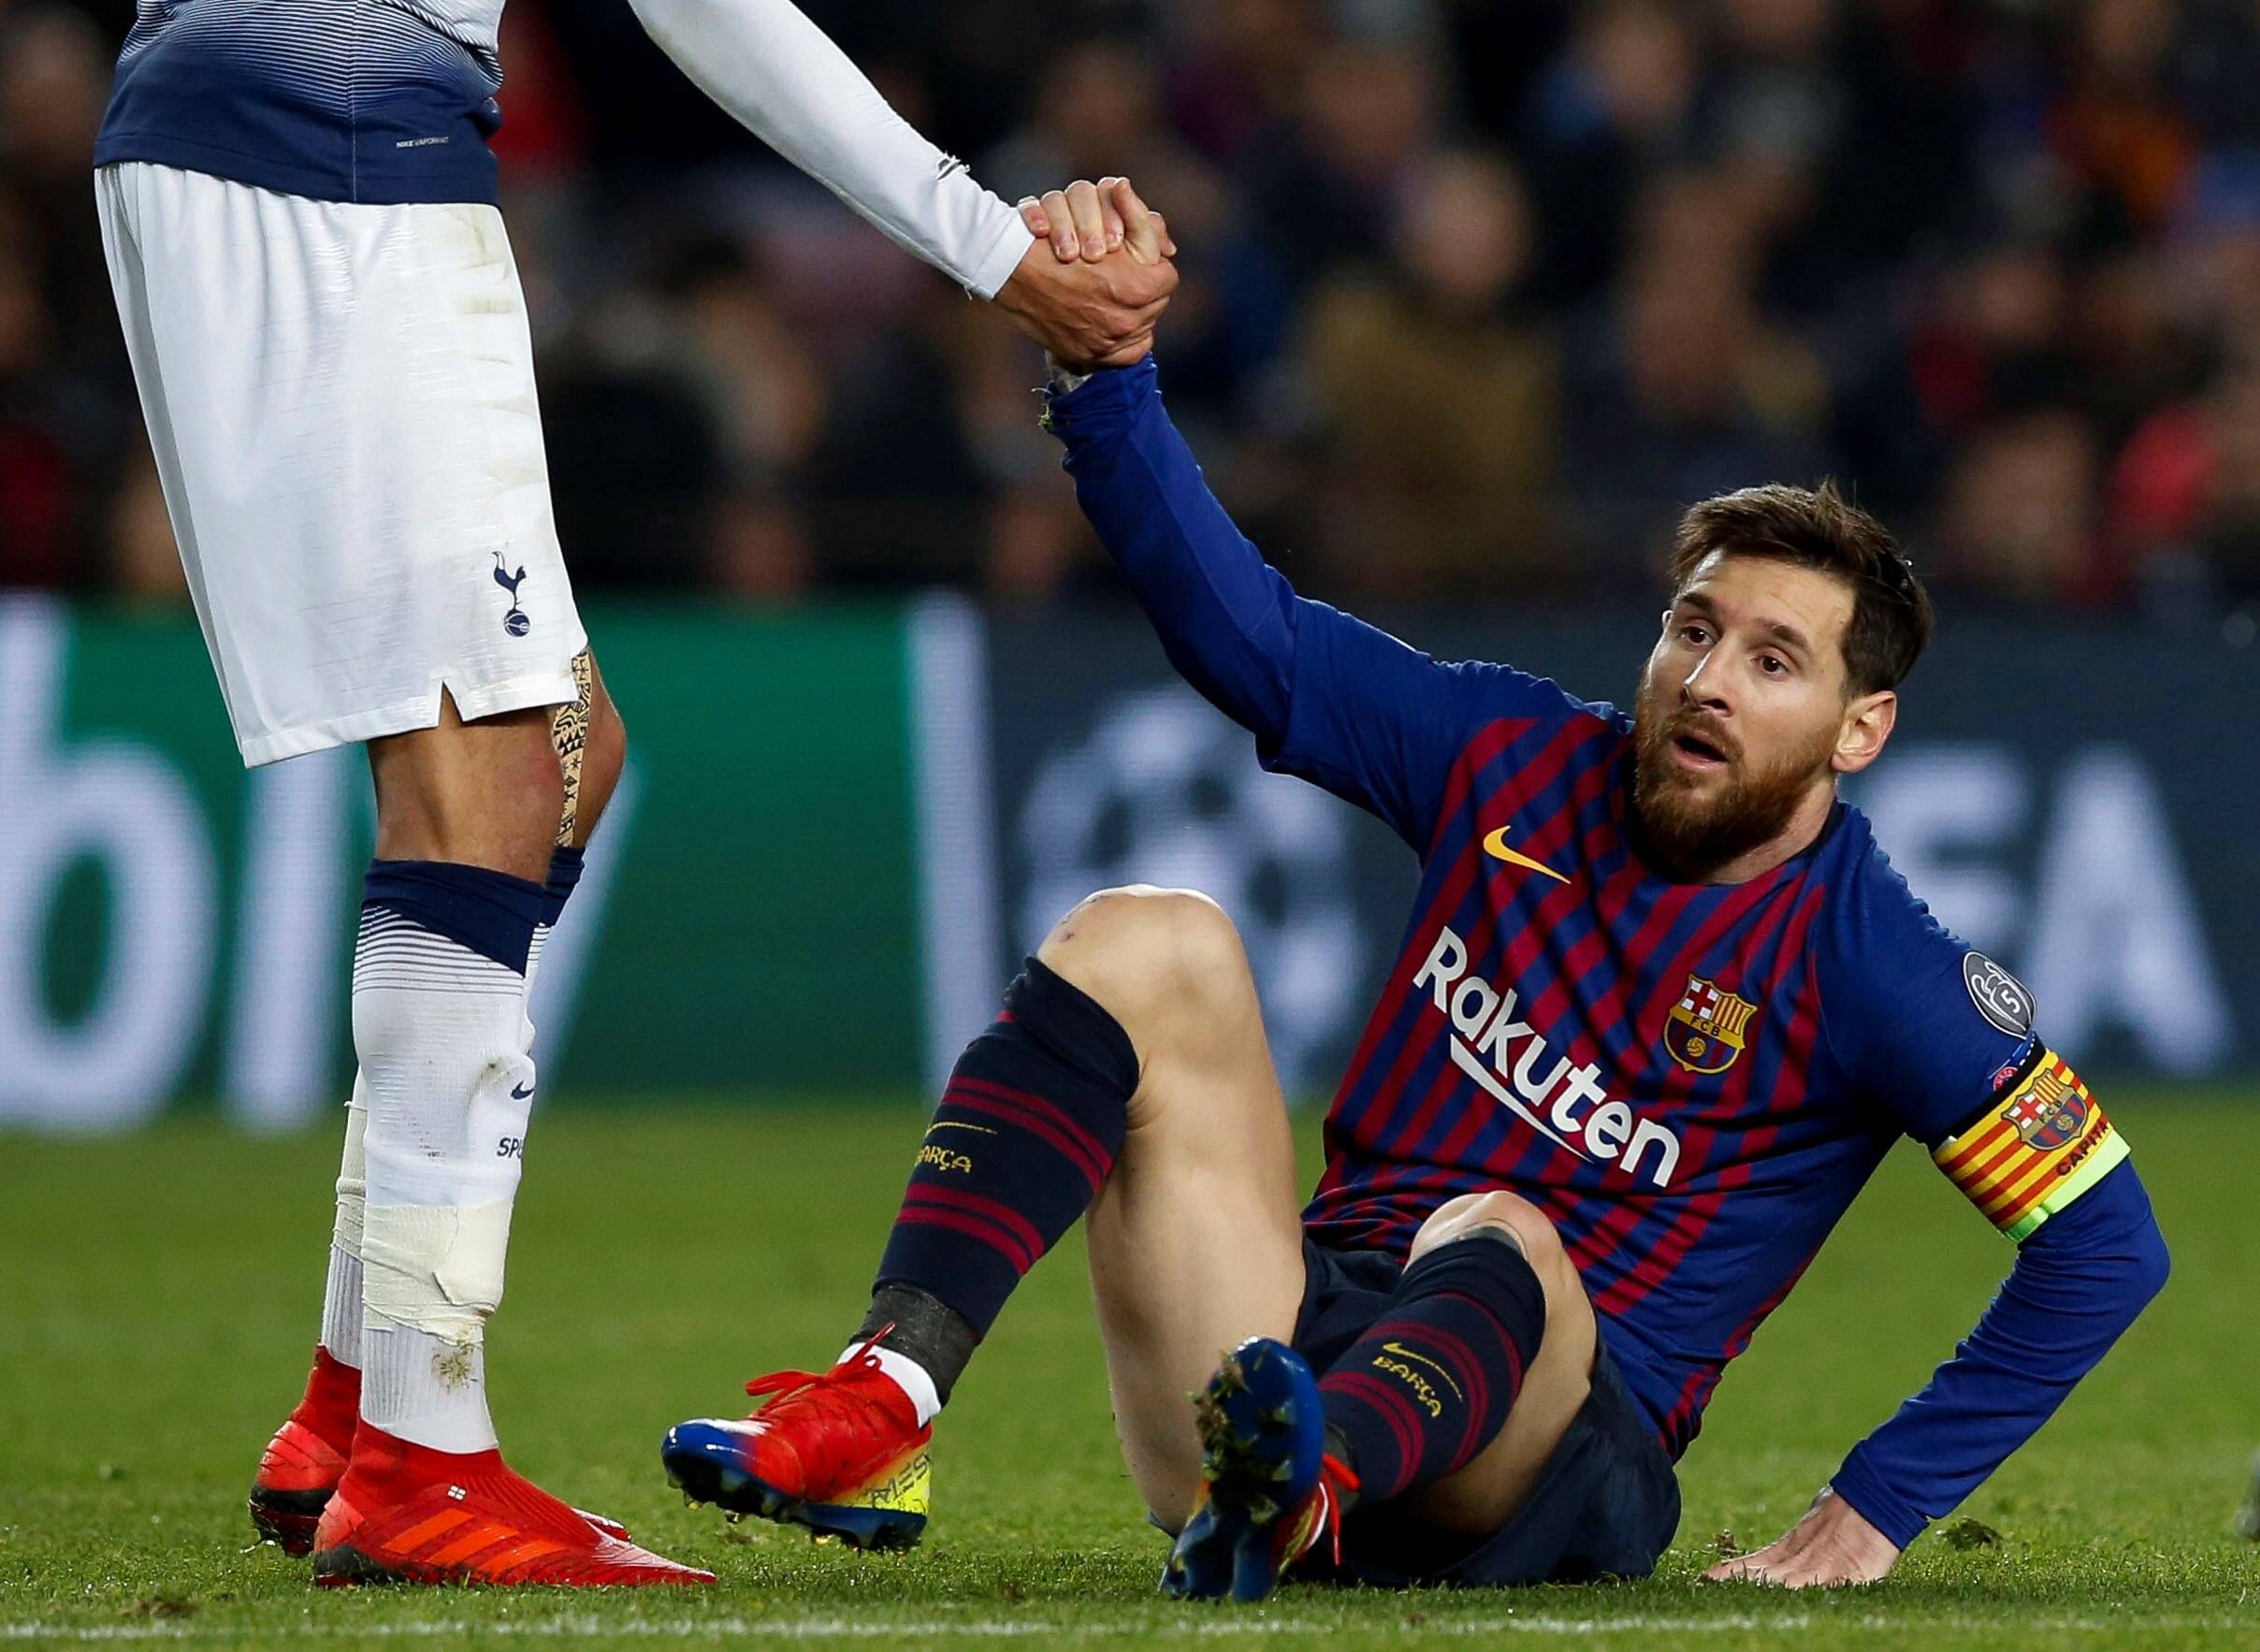 Need a helping hand from Spurs, Leo?